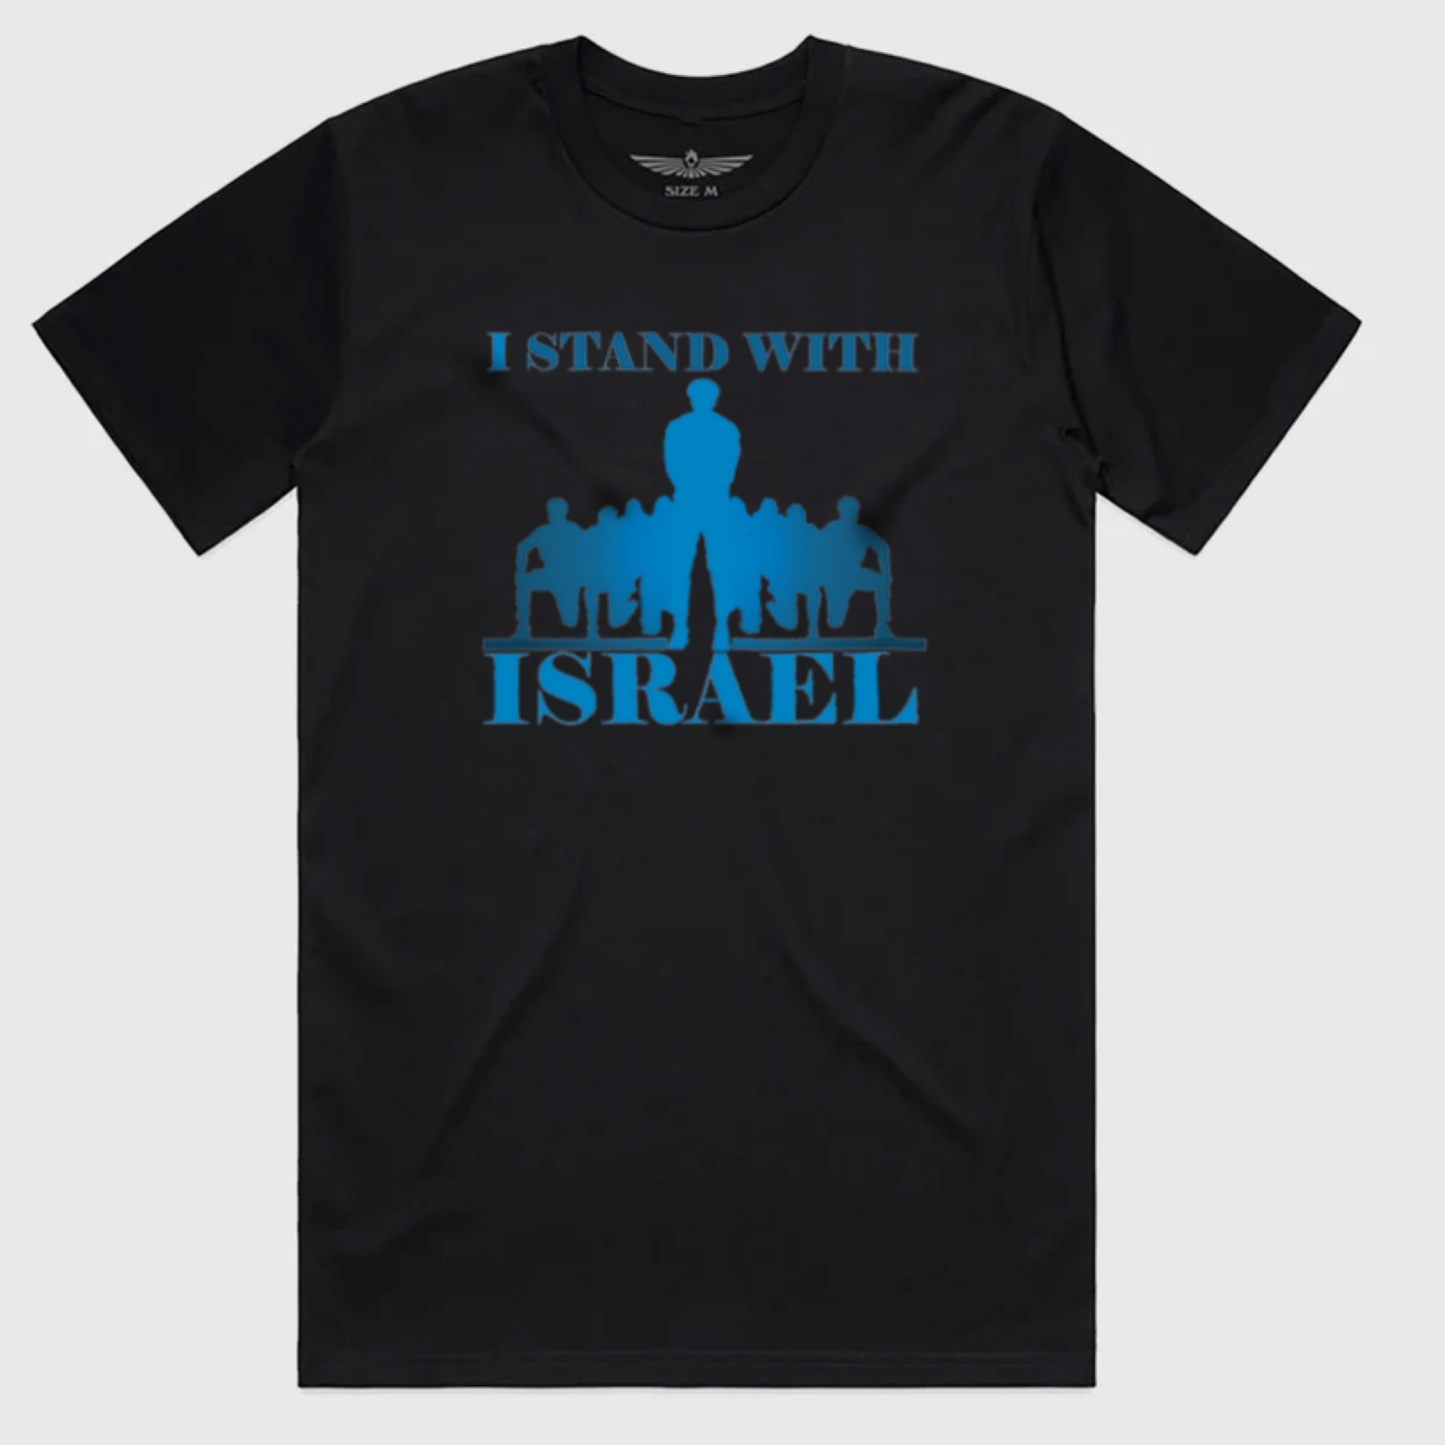 Stand with Israel t-shirt